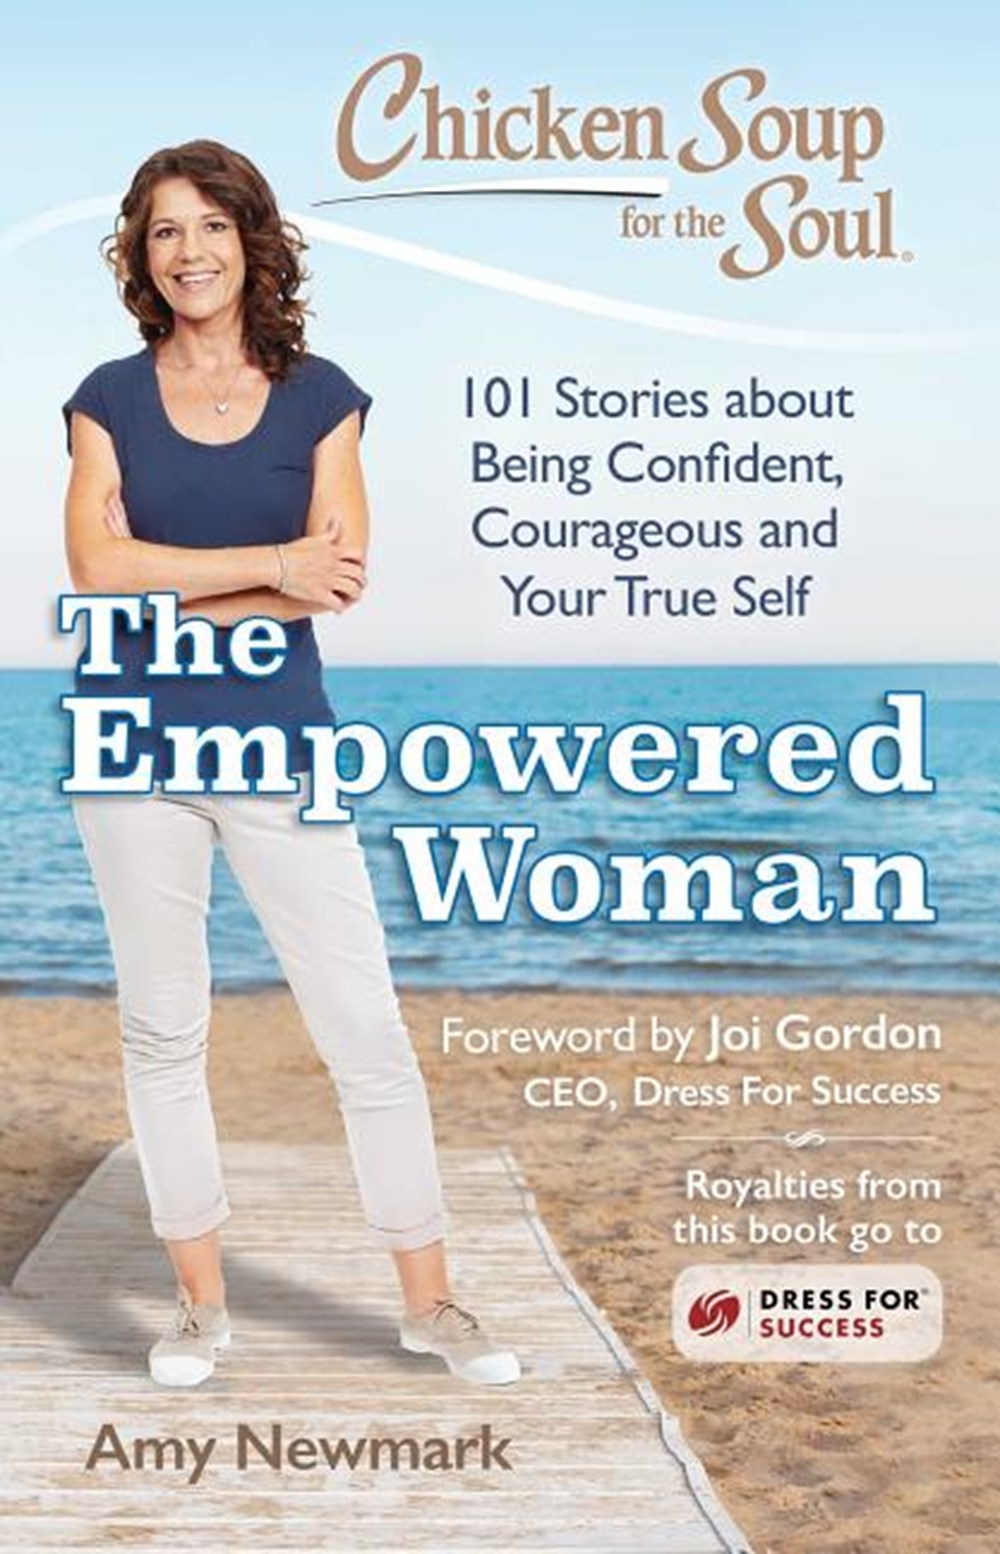 Chicken Soup for the Soul: The Empowered Woman: 101 Stories about Being Confident, Courageous and Yo